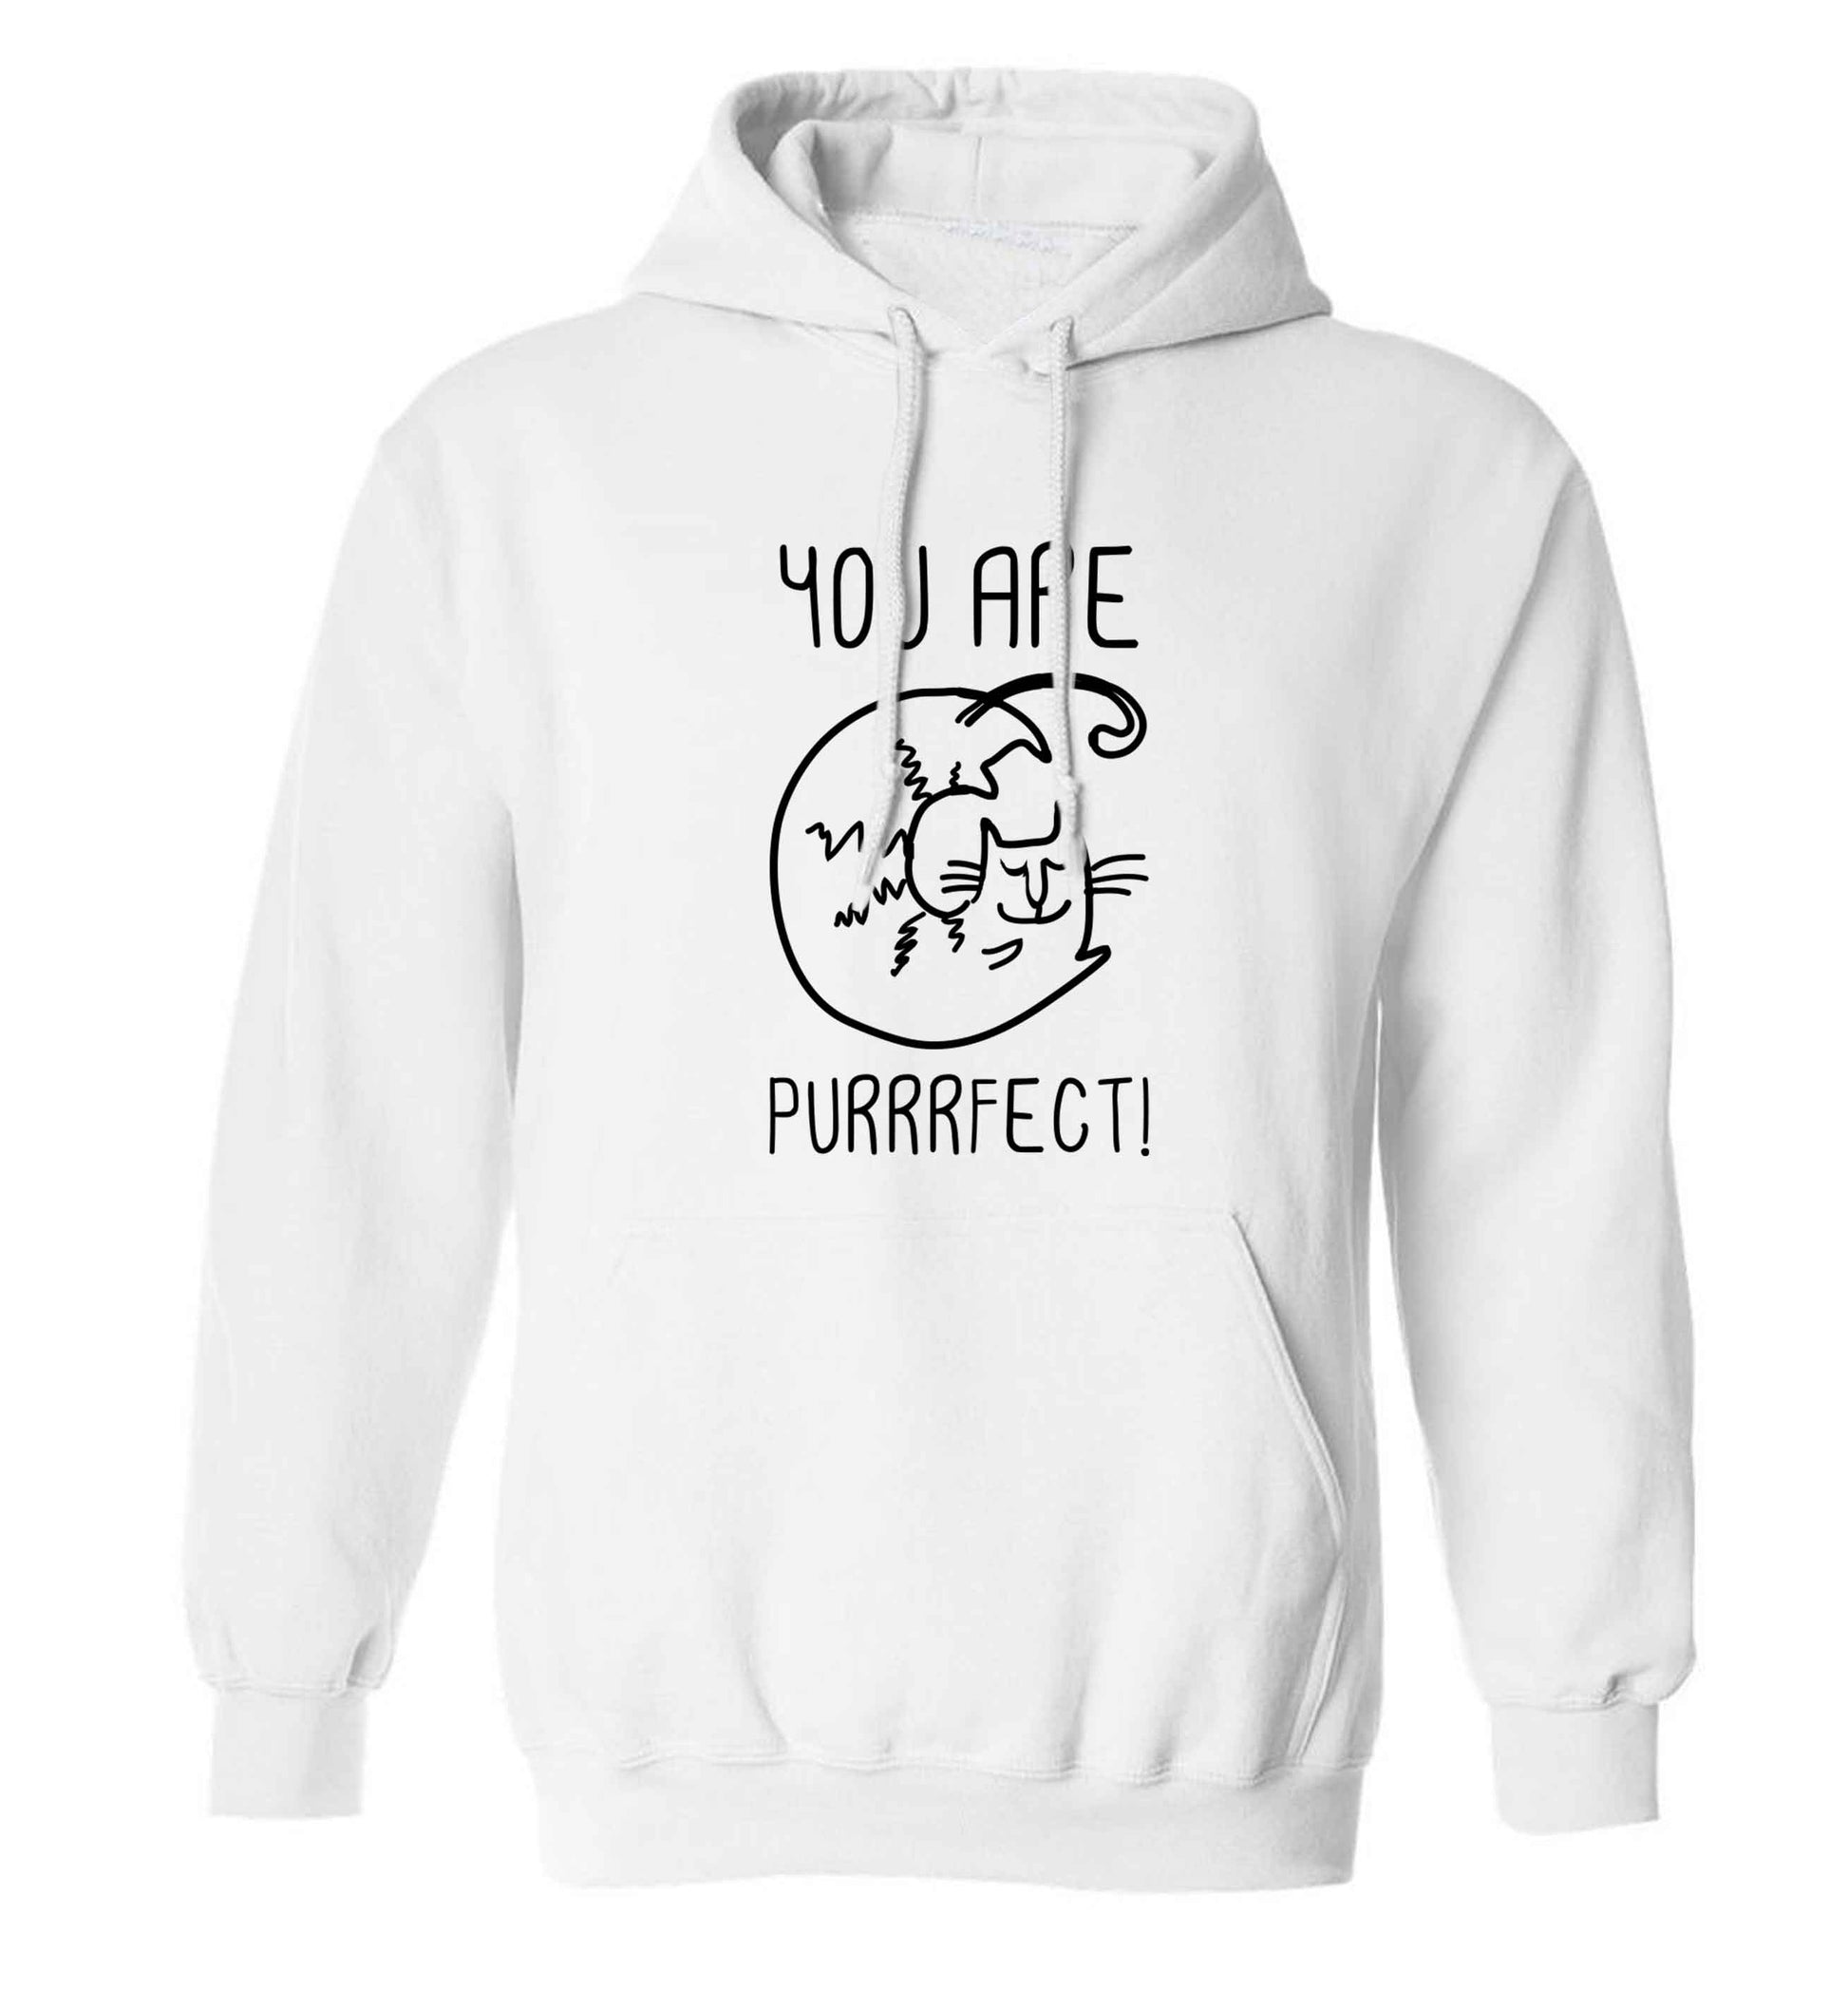 You are purrfect adults unisex white hoodie 2XL